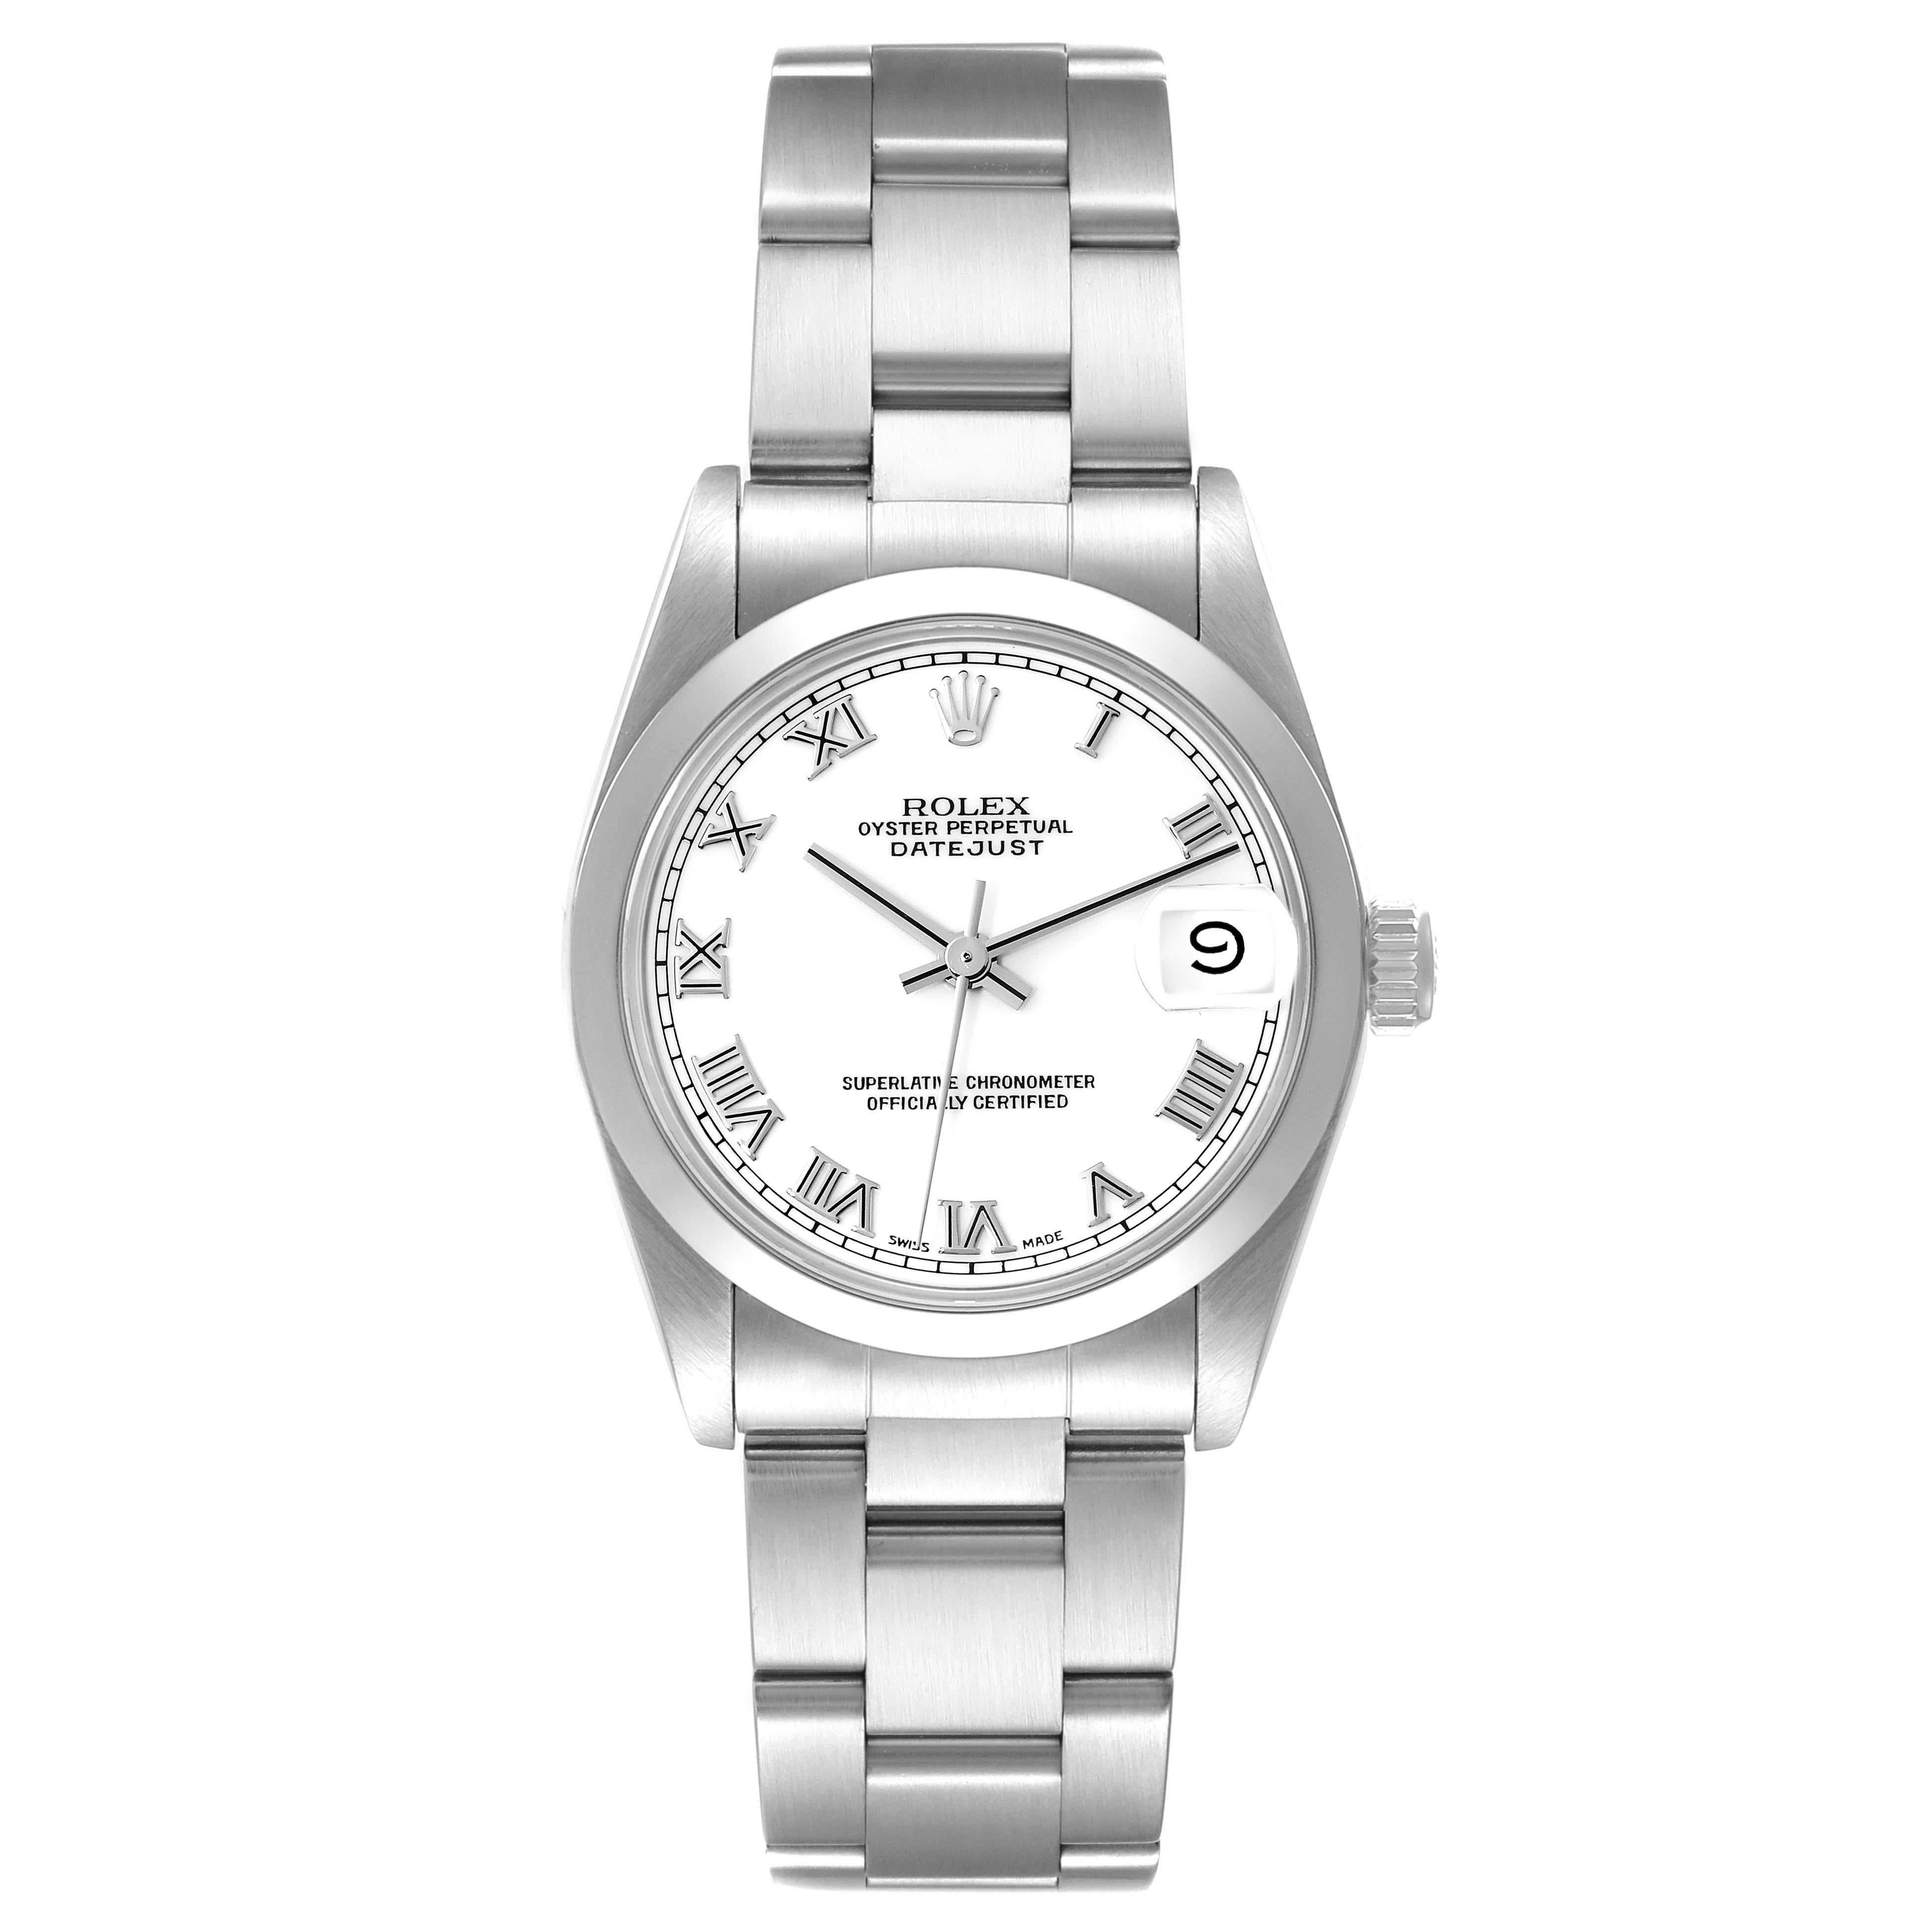 Rolex Datejust Midsize White Dial Steel Ladies Watch 68240 Box Papers. Officially certified chronometer automatic self-winding movement. Stainless steel oyster case 31 mm in diameter. Rolex logo on the crown. Stainless steel smooth bezel. Scratch